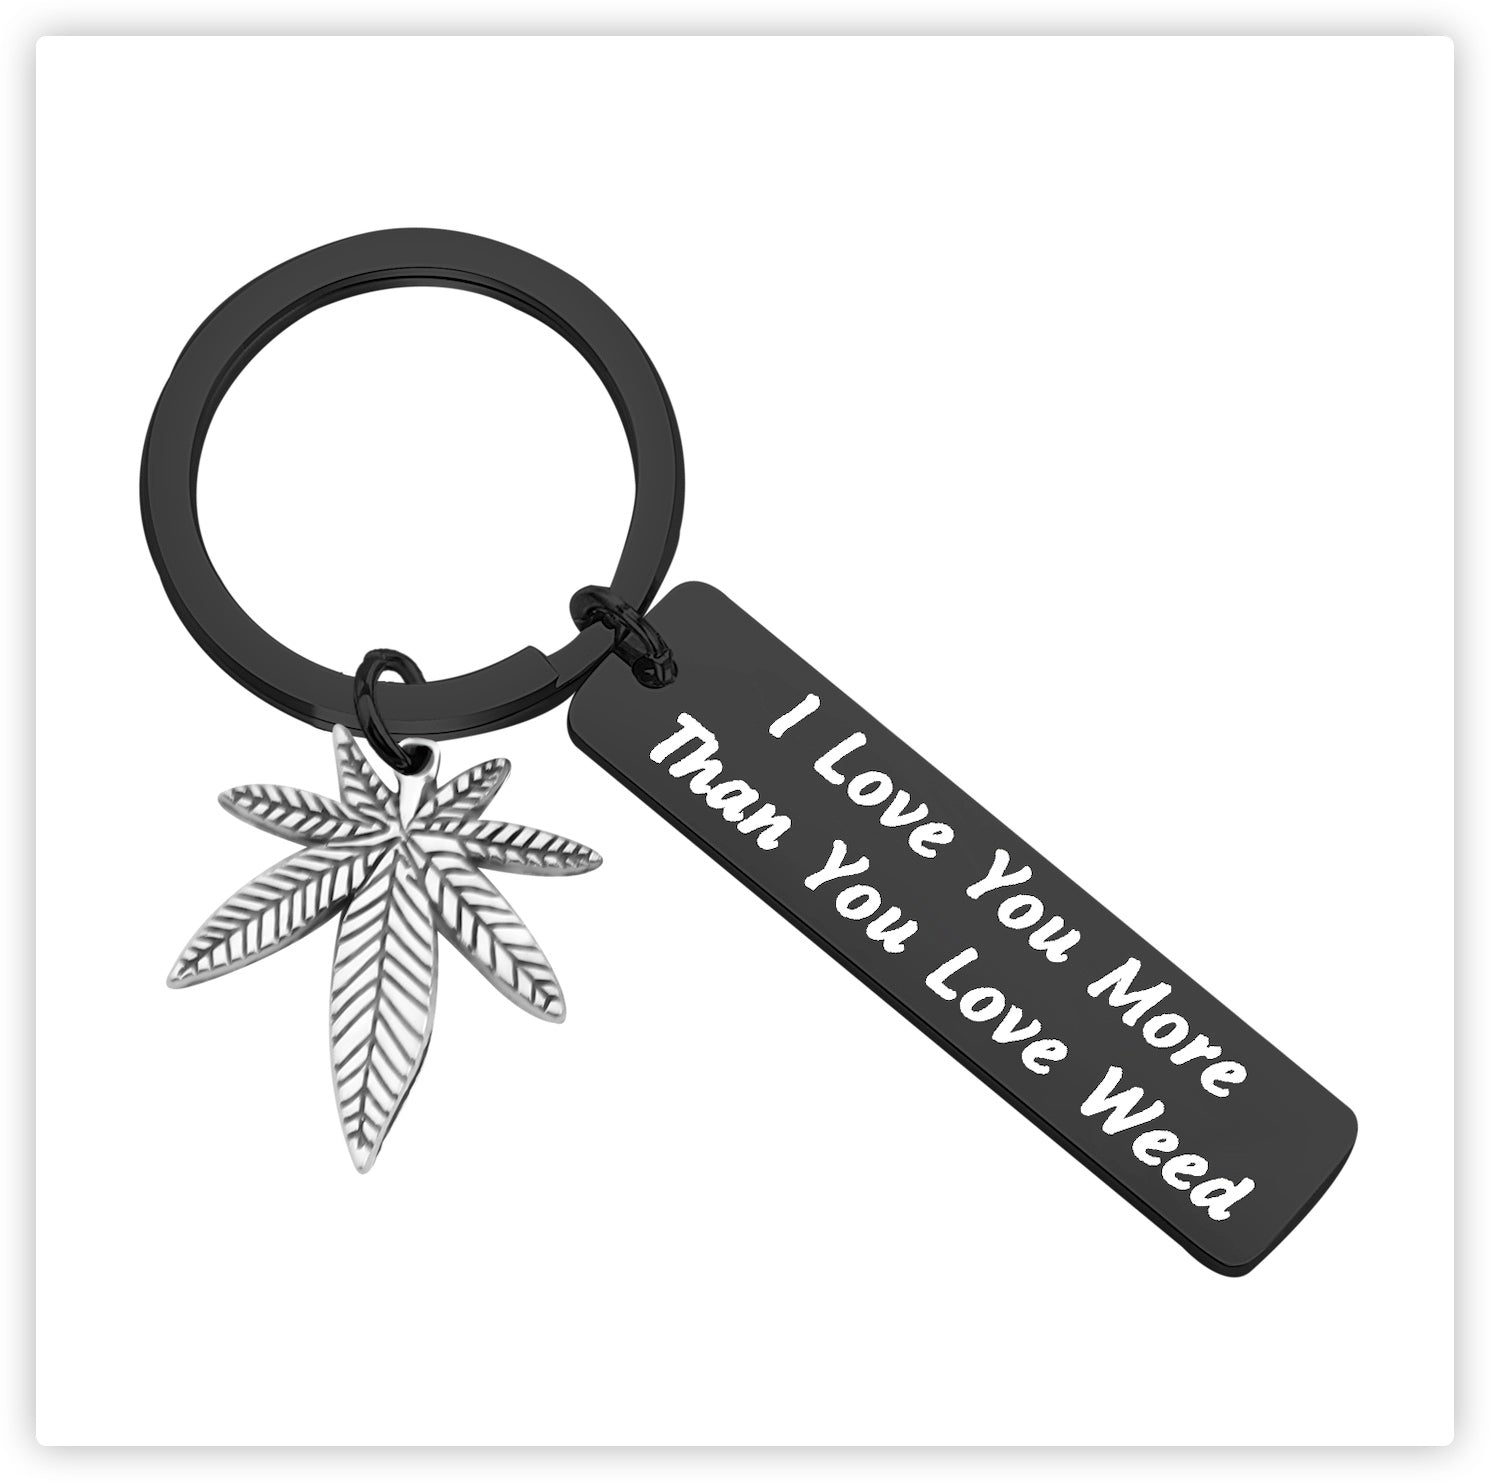 420 Gift Marijuana Jewelry I Love You More Than You Love Weed Keychain Gift for Boyfriend Valentines Day Gift